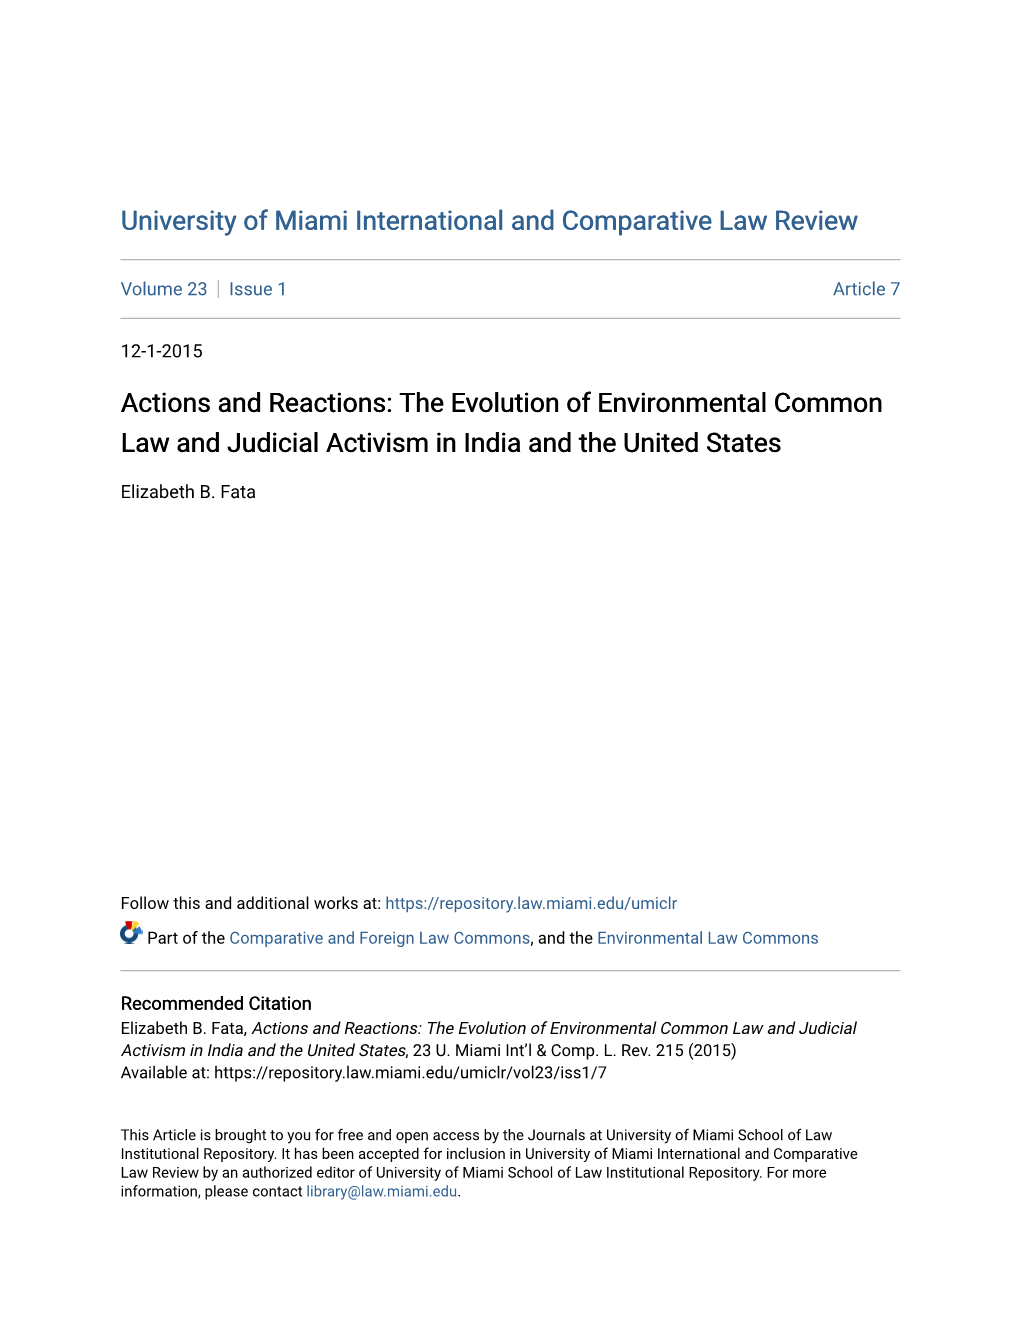 Actions and Reactions: the Evolution of Environmental Common Law and Judicial Activism in India and the United States